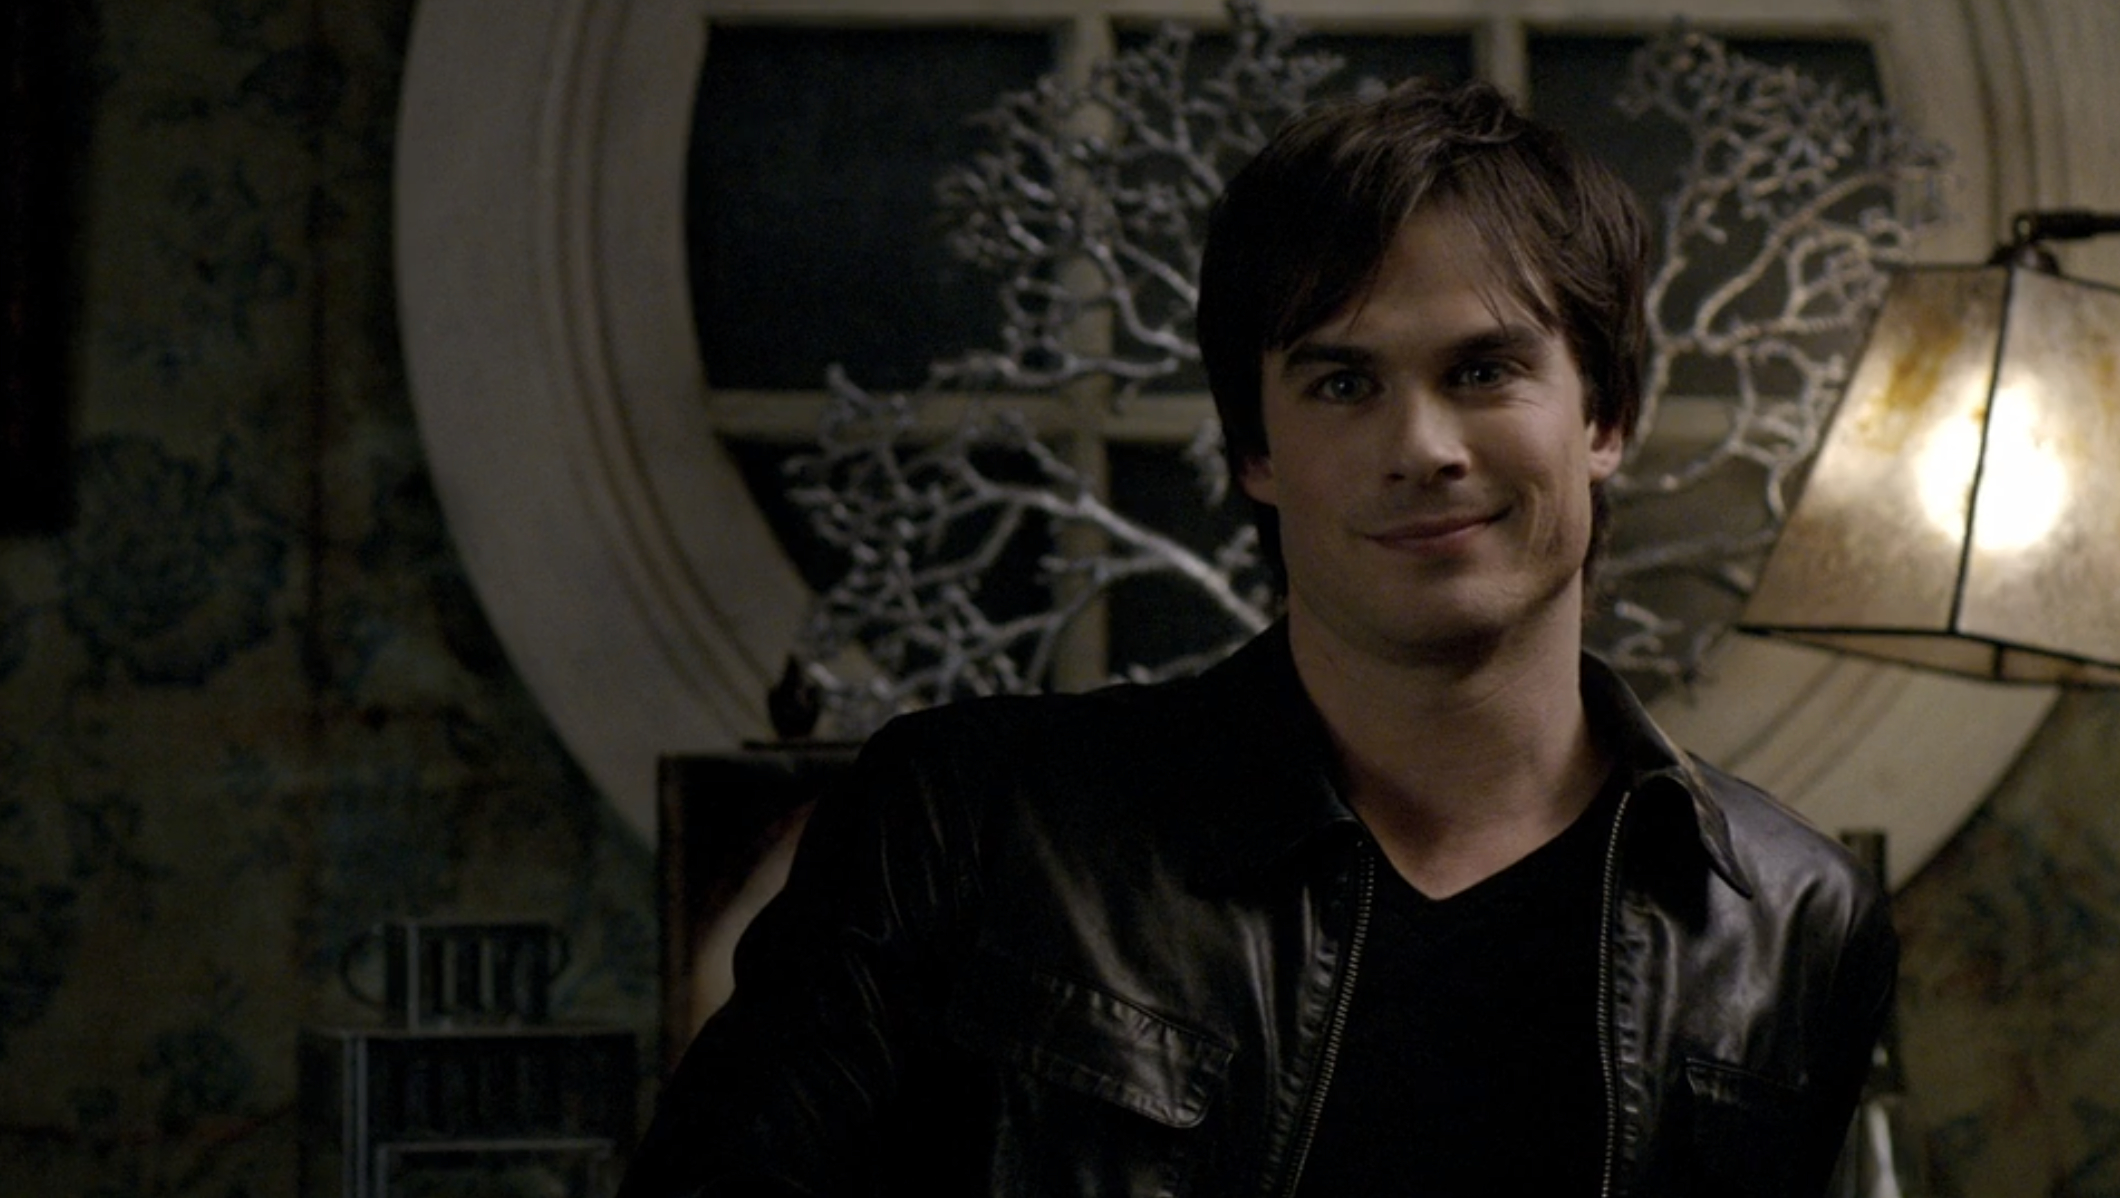 damon in the series premiere of the vampire diaries